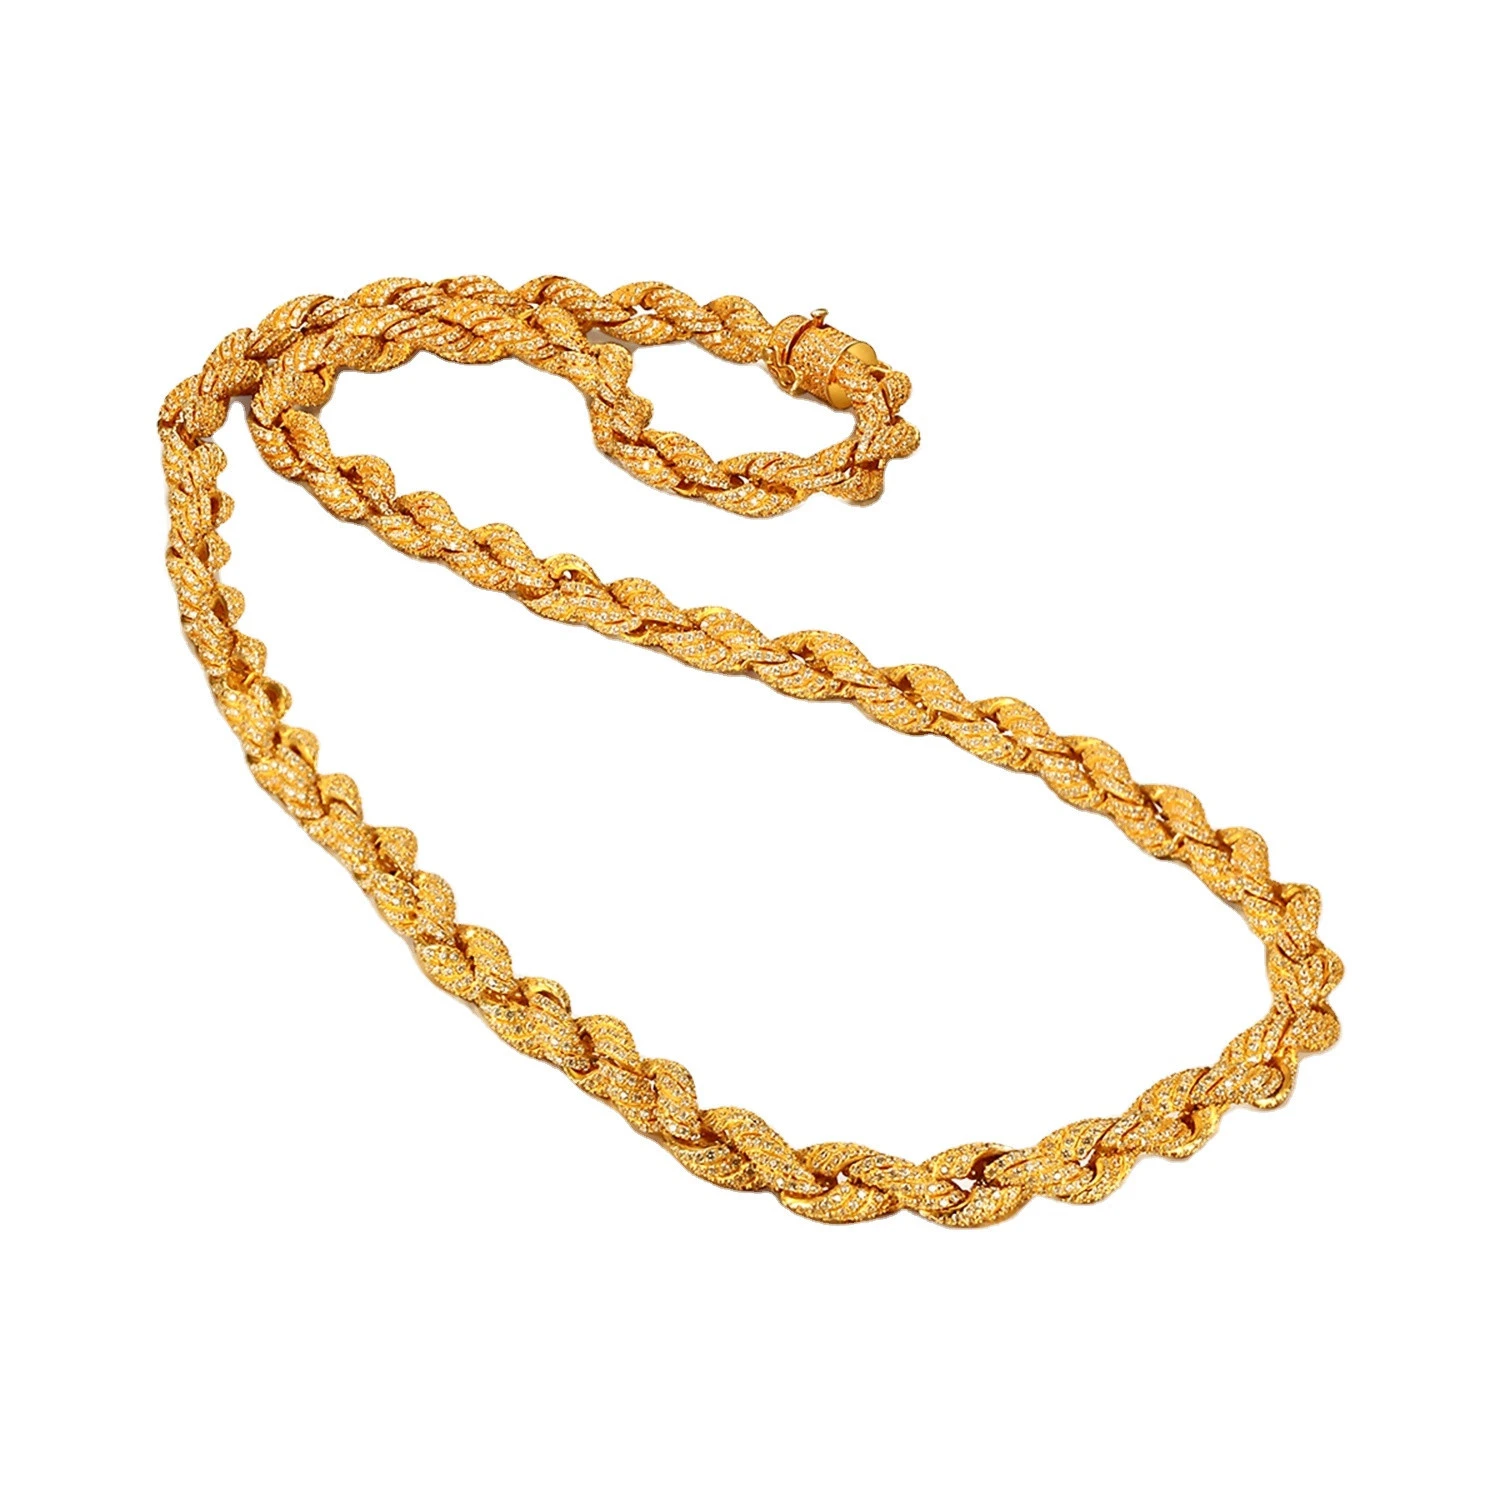 JASEN Jewelry  Hip hop jewelry 18k gold rope Iced Out  Cz twist Chain Necklace